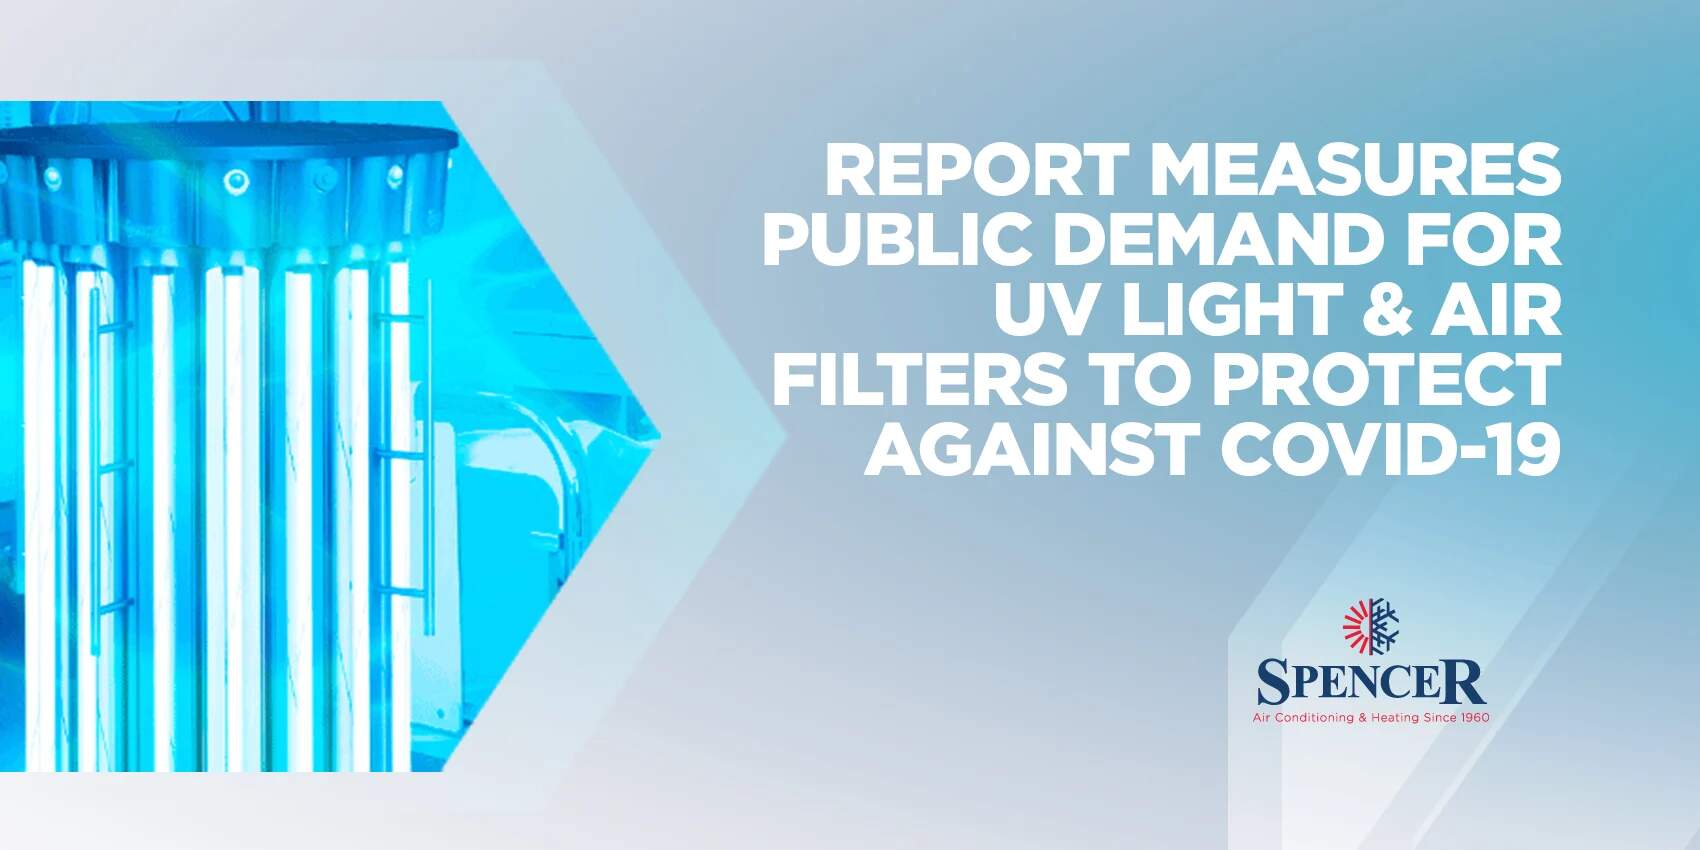 Report Measures Public Demand For UV Light & Air Filters To Protect Against Covid-19